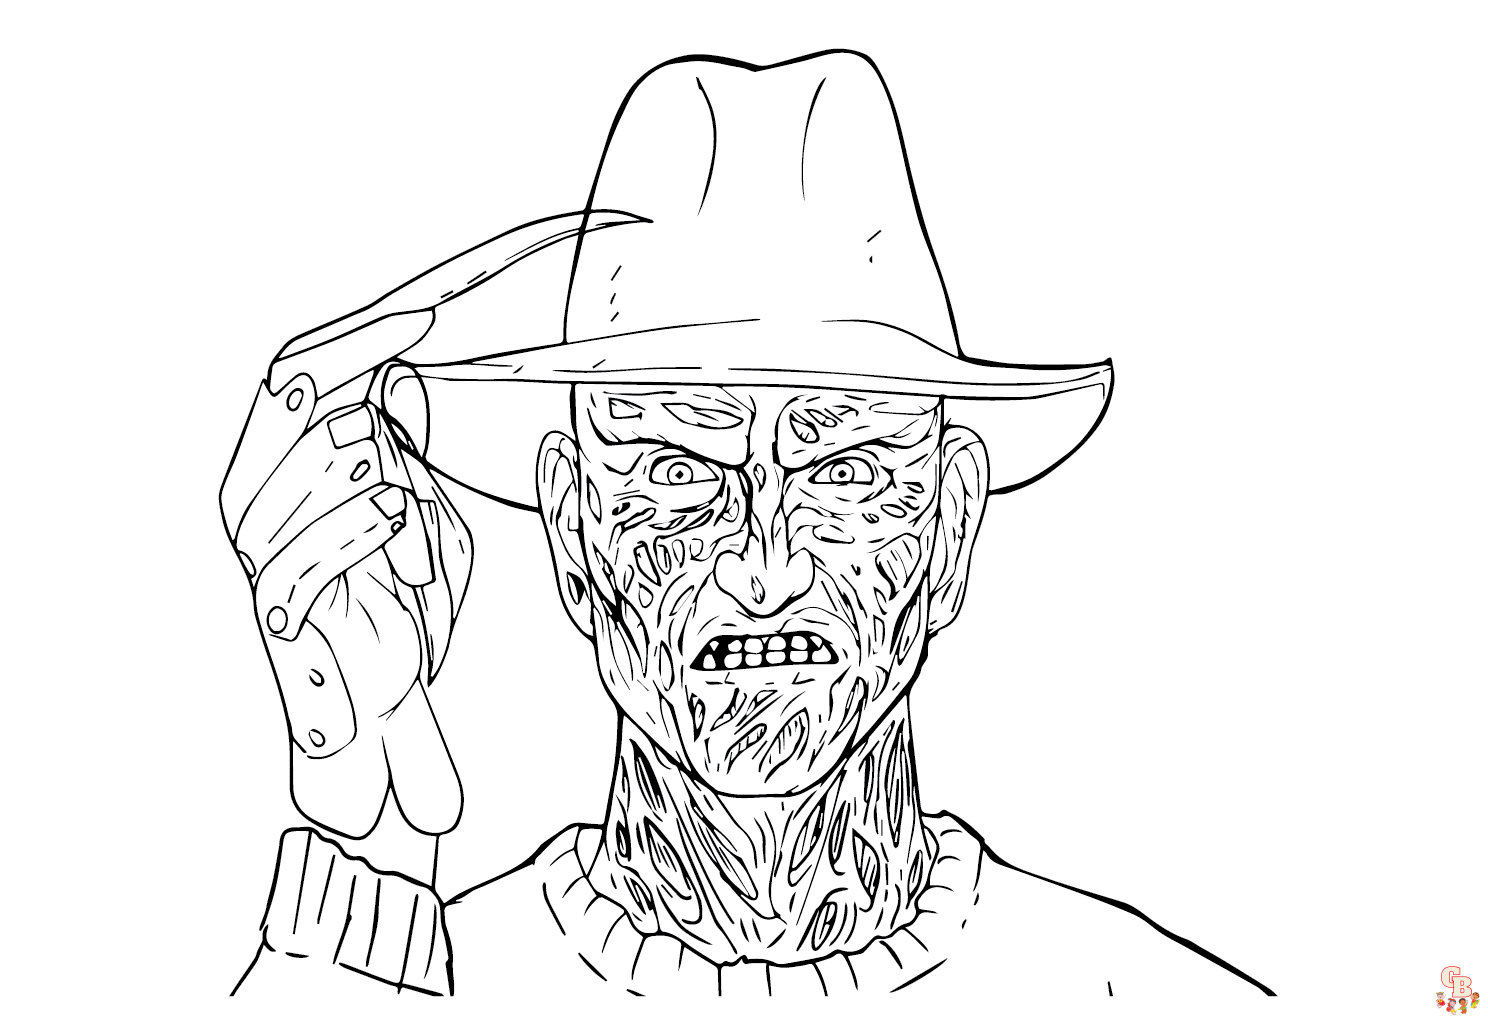 Free Freddy Krueger coloring pages for kids